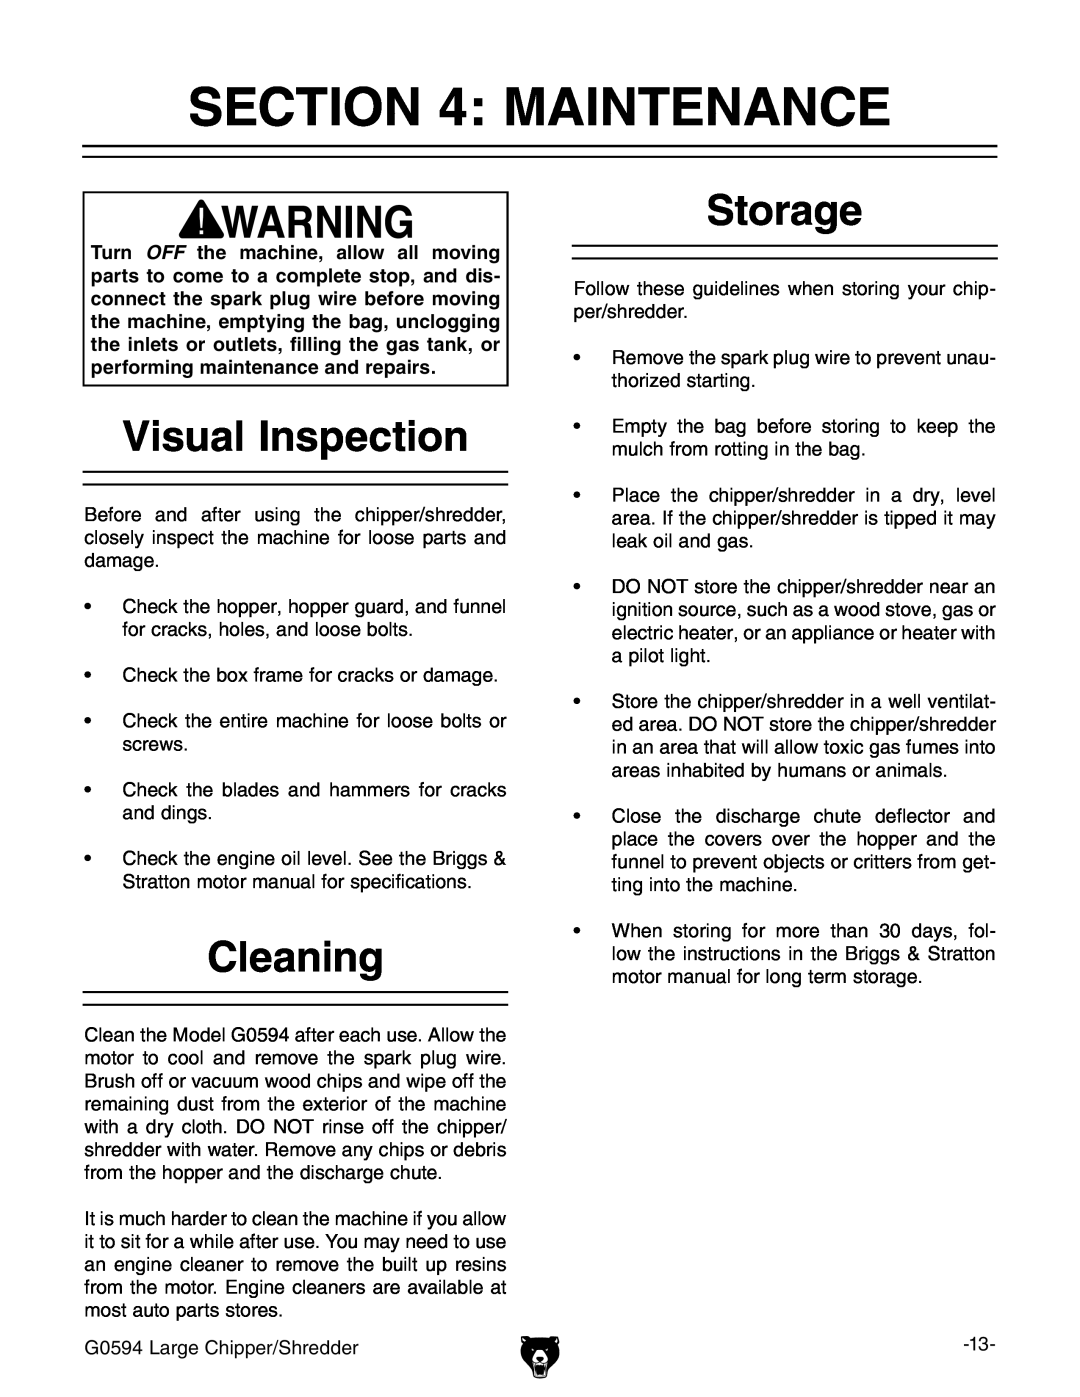 Grizzly G0594 owner manual Maintenance, Visual Inspection, Cleaning, Storage 